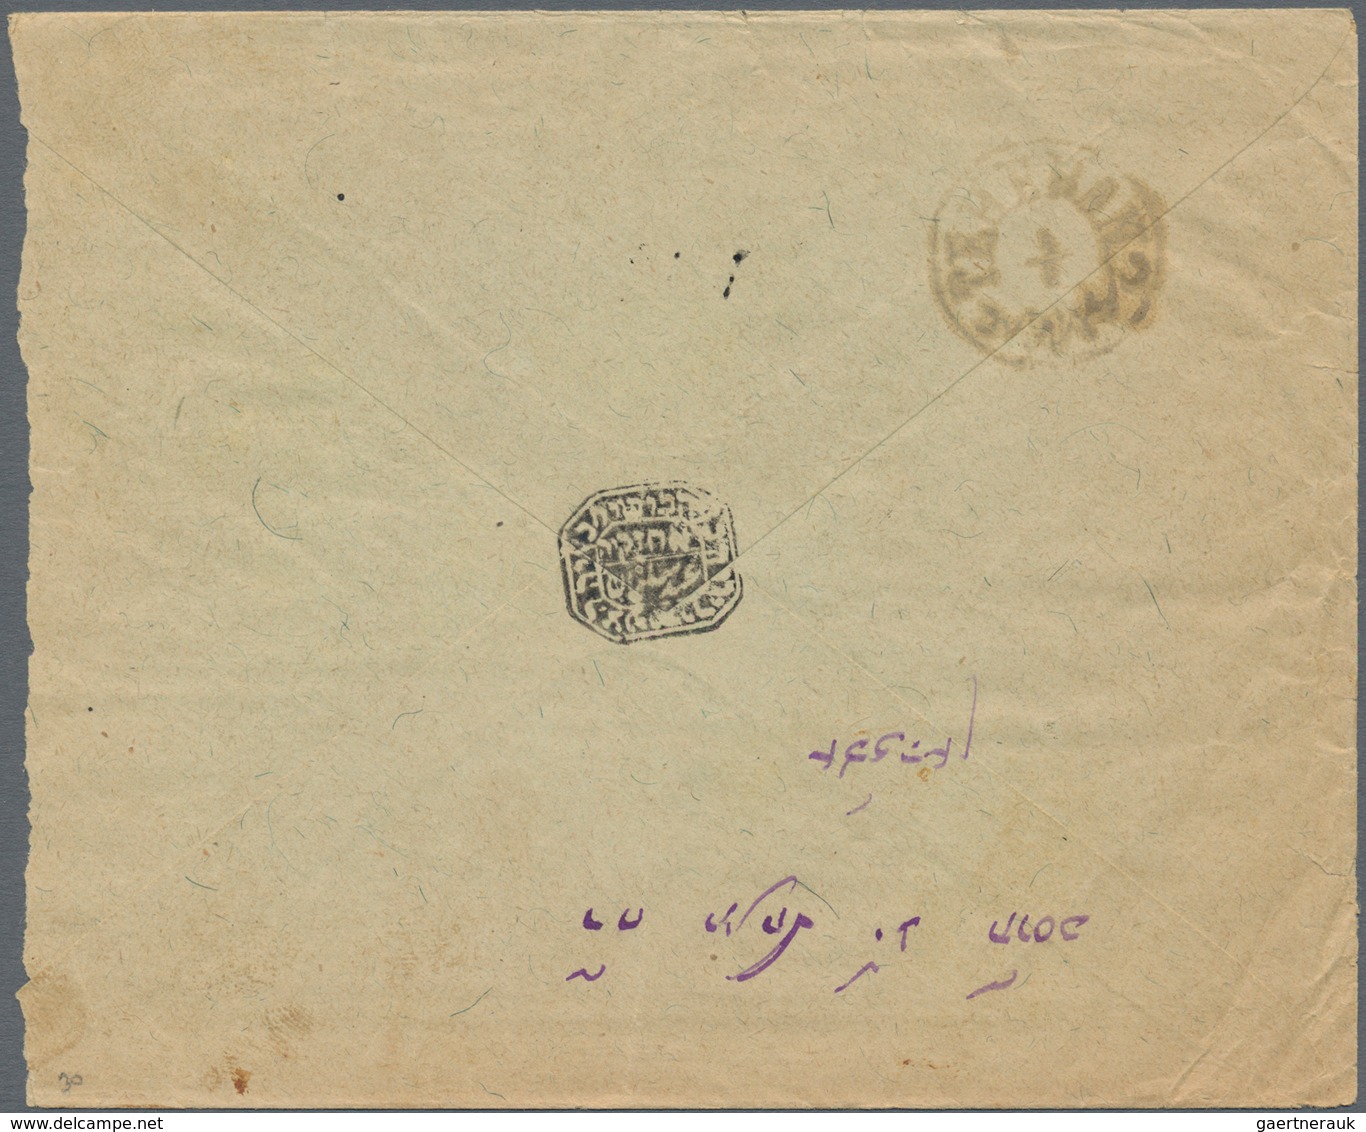 Iran: 1902, Typeset Issue, 1kr. Violett/blue, Single Franking On Registered Cover From Isfahan To Te - Iran